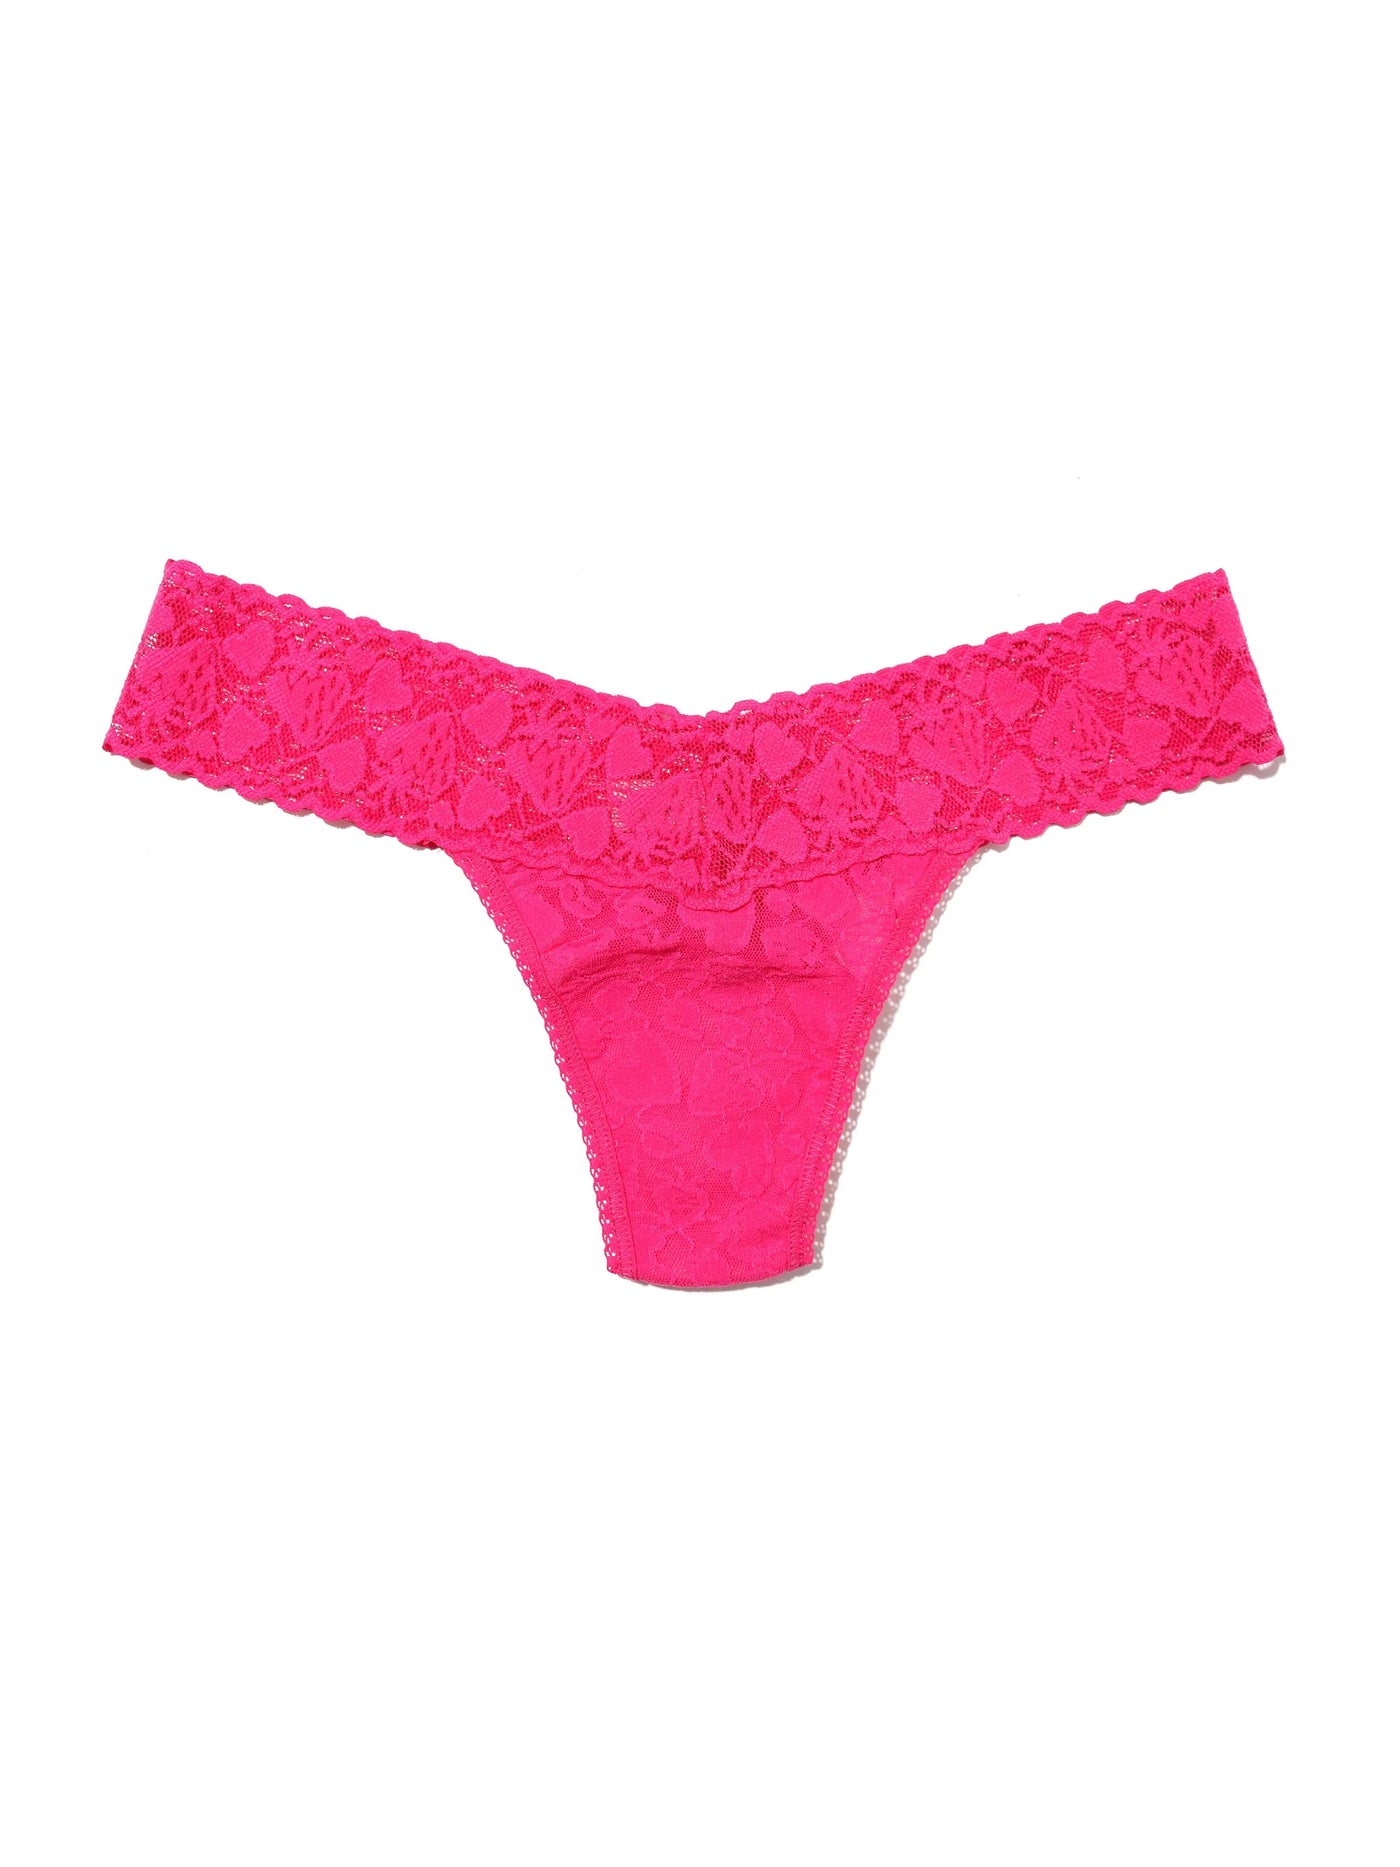 Berry In Love Lowrise Thong in Rare Pink